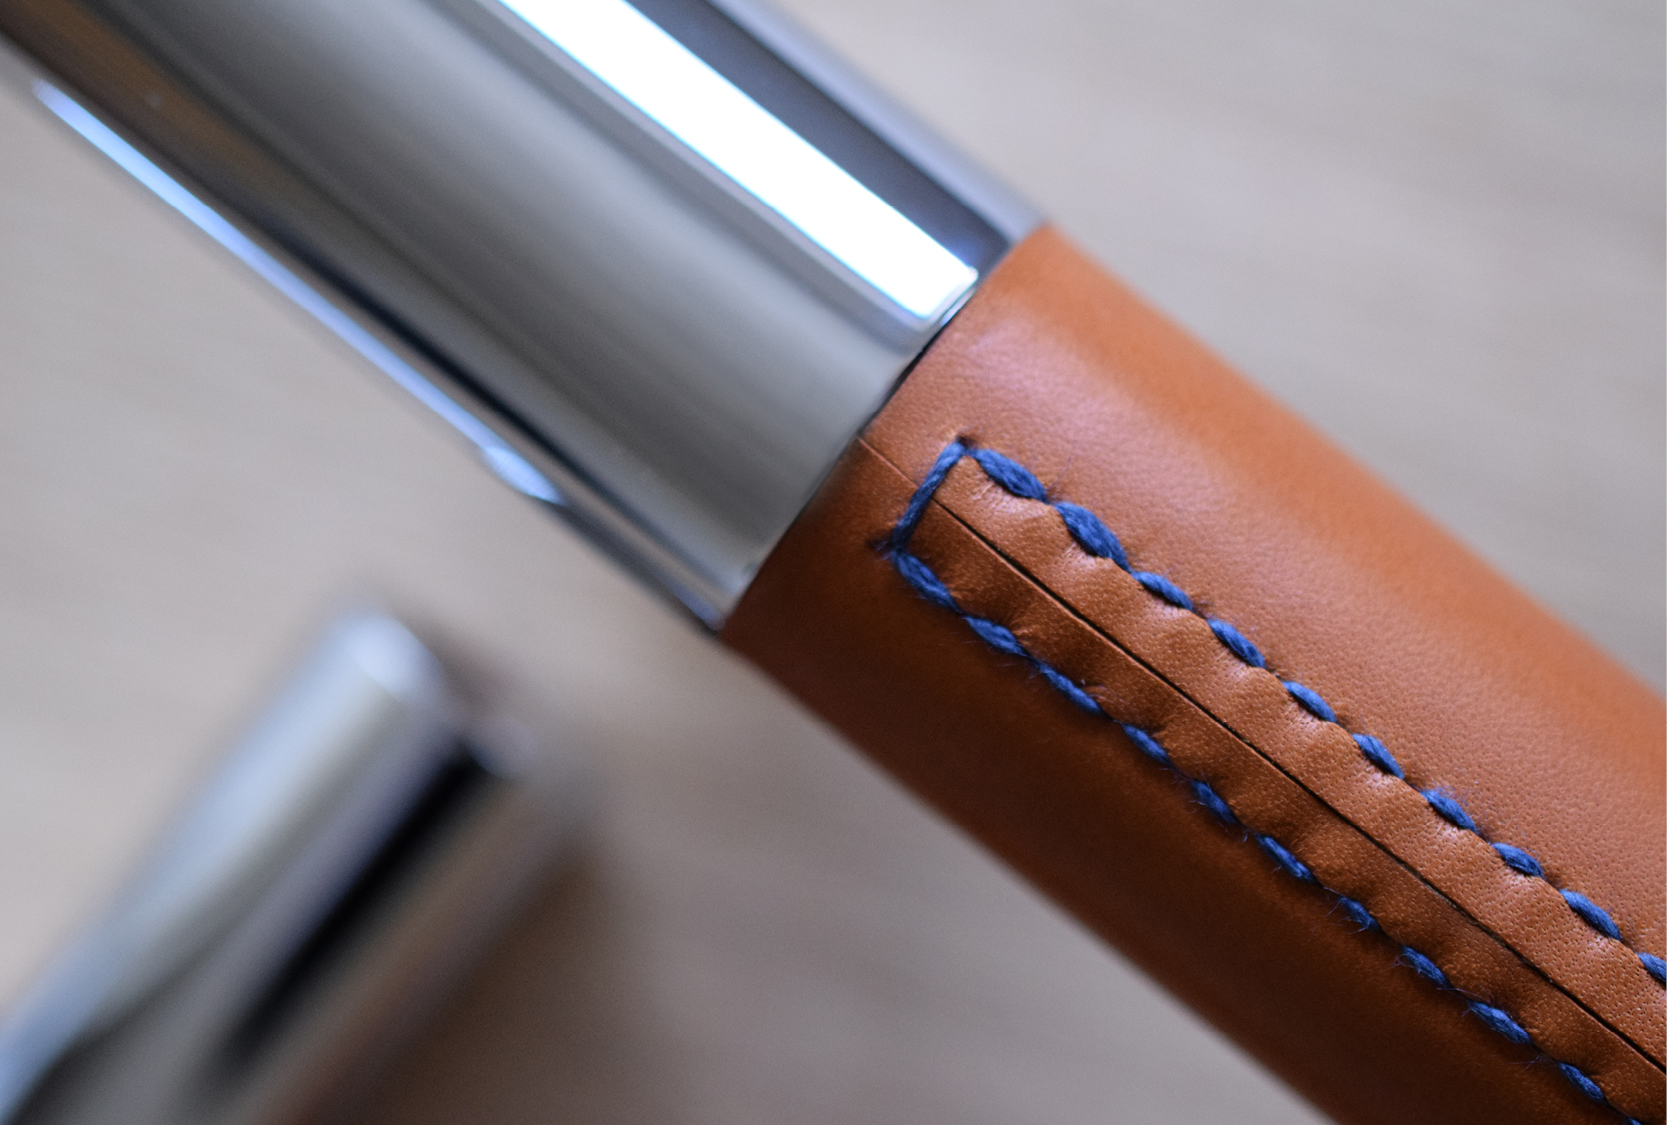 LARGE BARREL MULTI GRIP WITH BLUE STITCHING